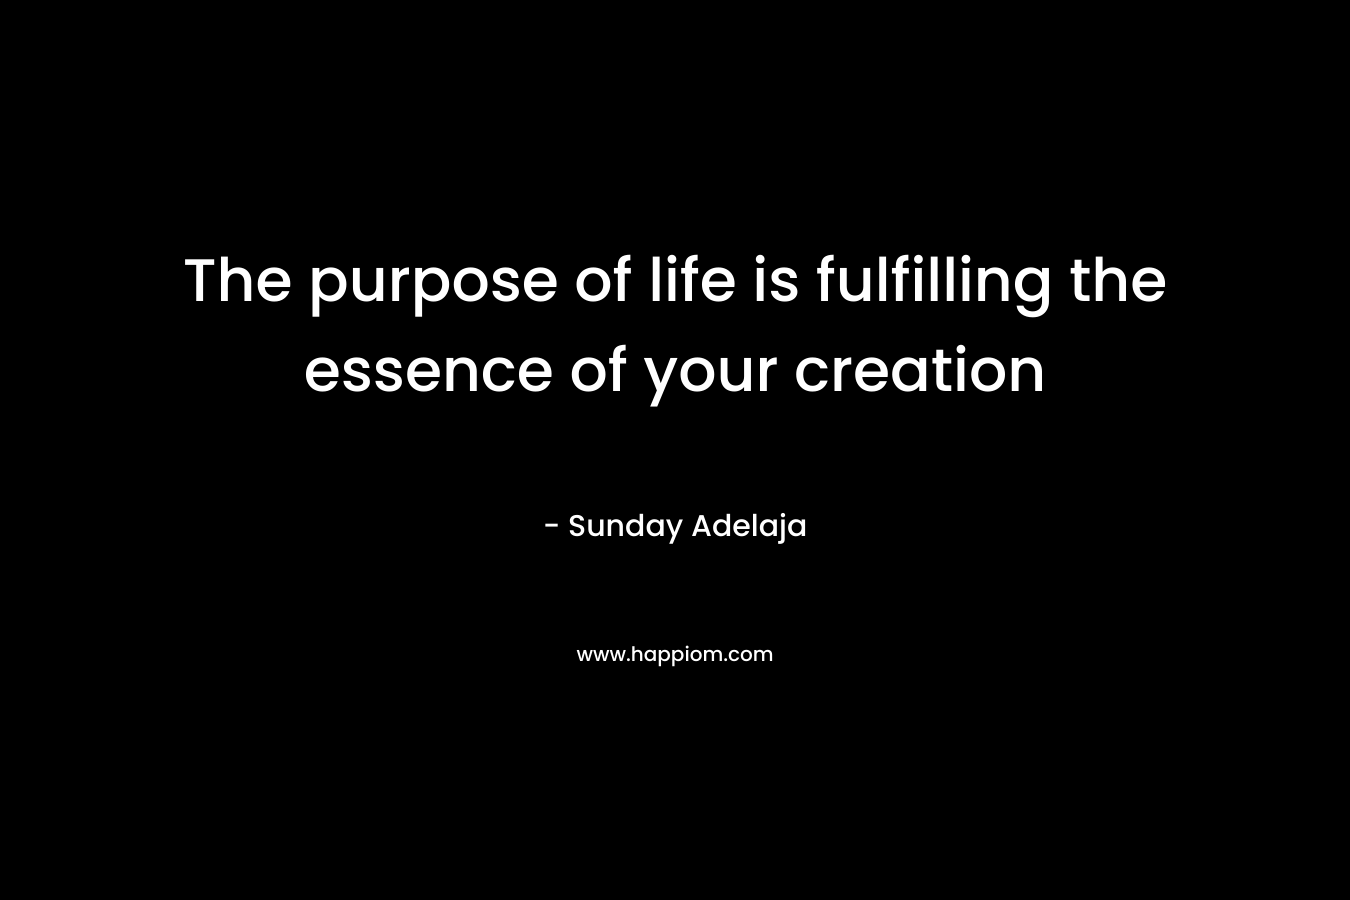 The purpose of life is fulfilling the essence of your creation